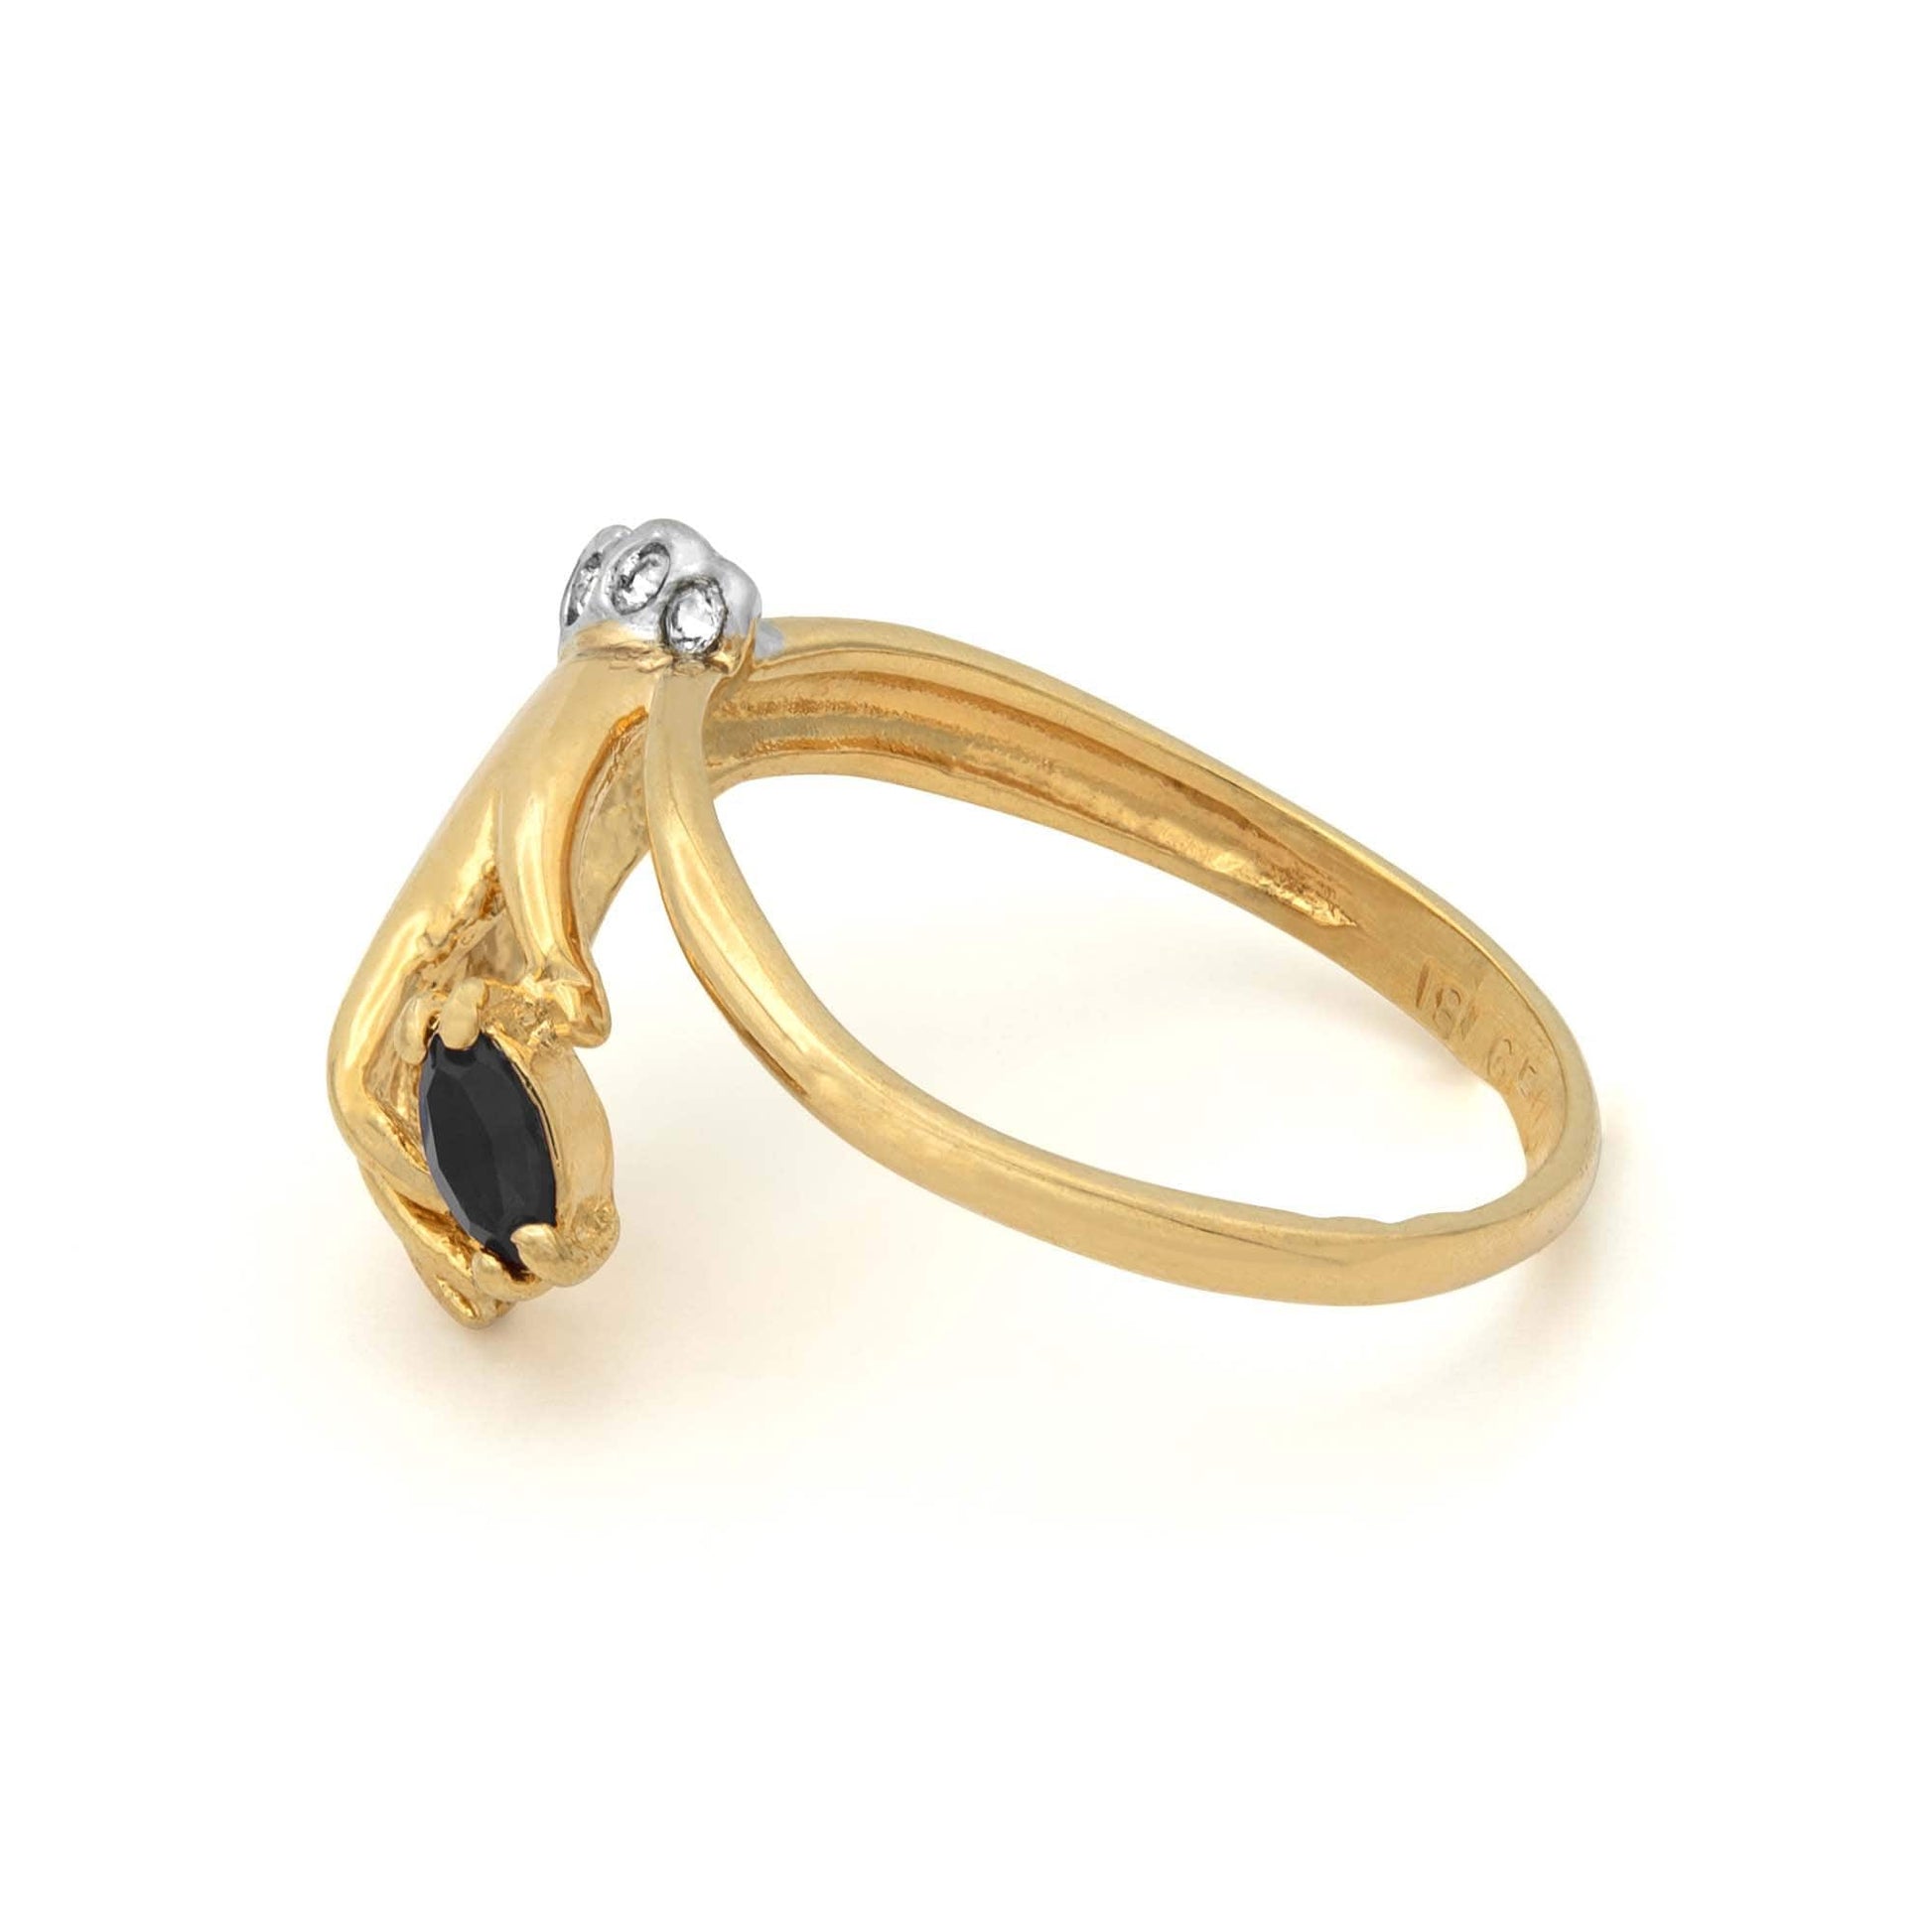 Vintage Ring Black and Clear Austrian Crystals 18k Gold Woman's Antique Rings Victorian Handmade Jewelry #R2964 - Limited Stock - Never Worn